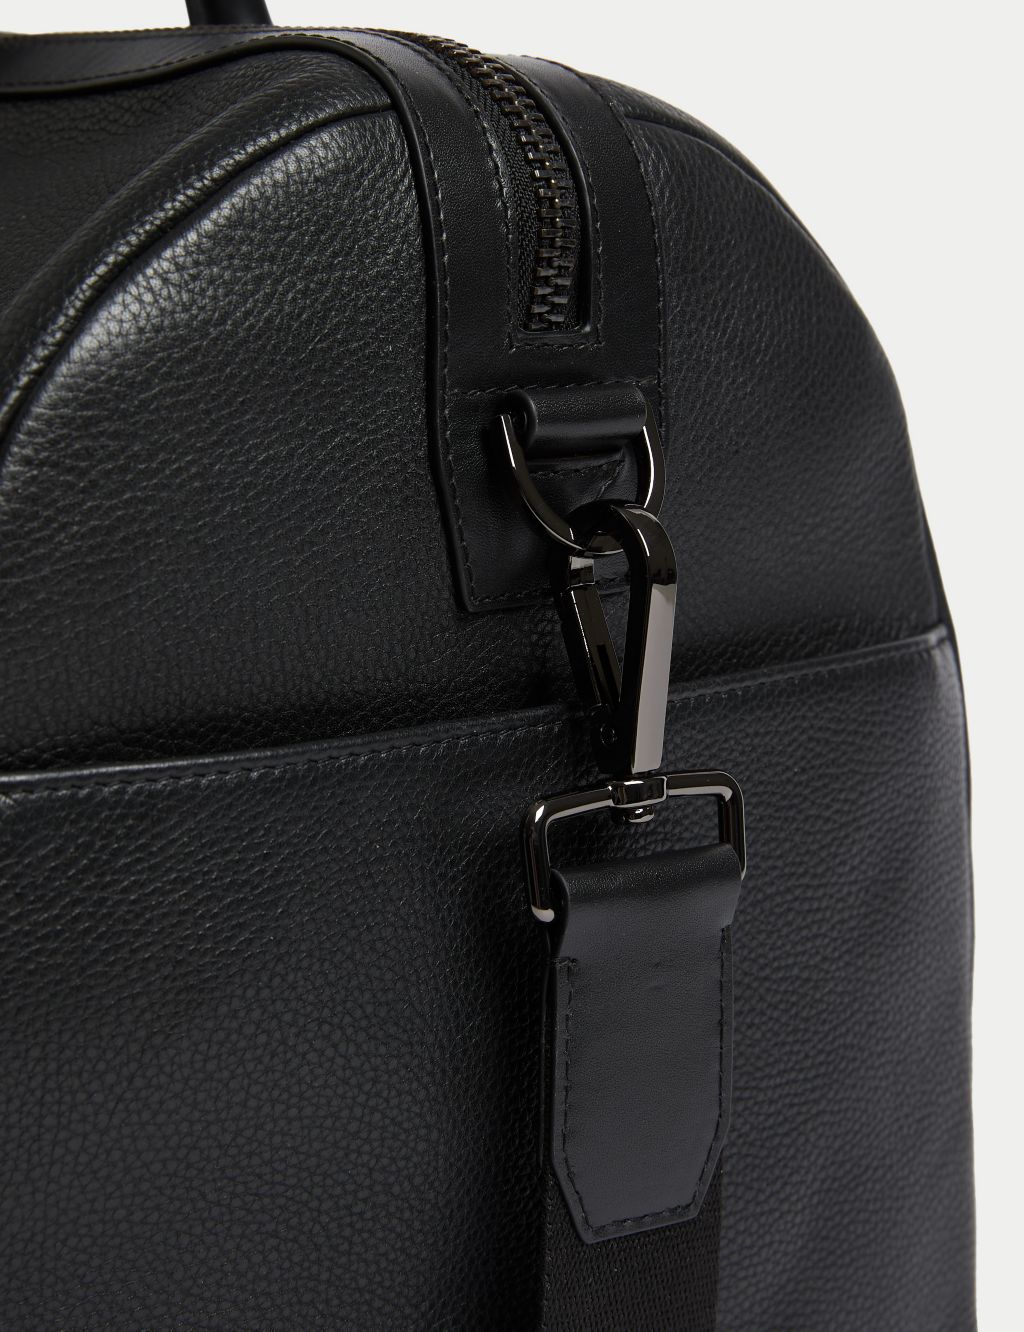 Leather Weekend Bag | Autograph | M&S